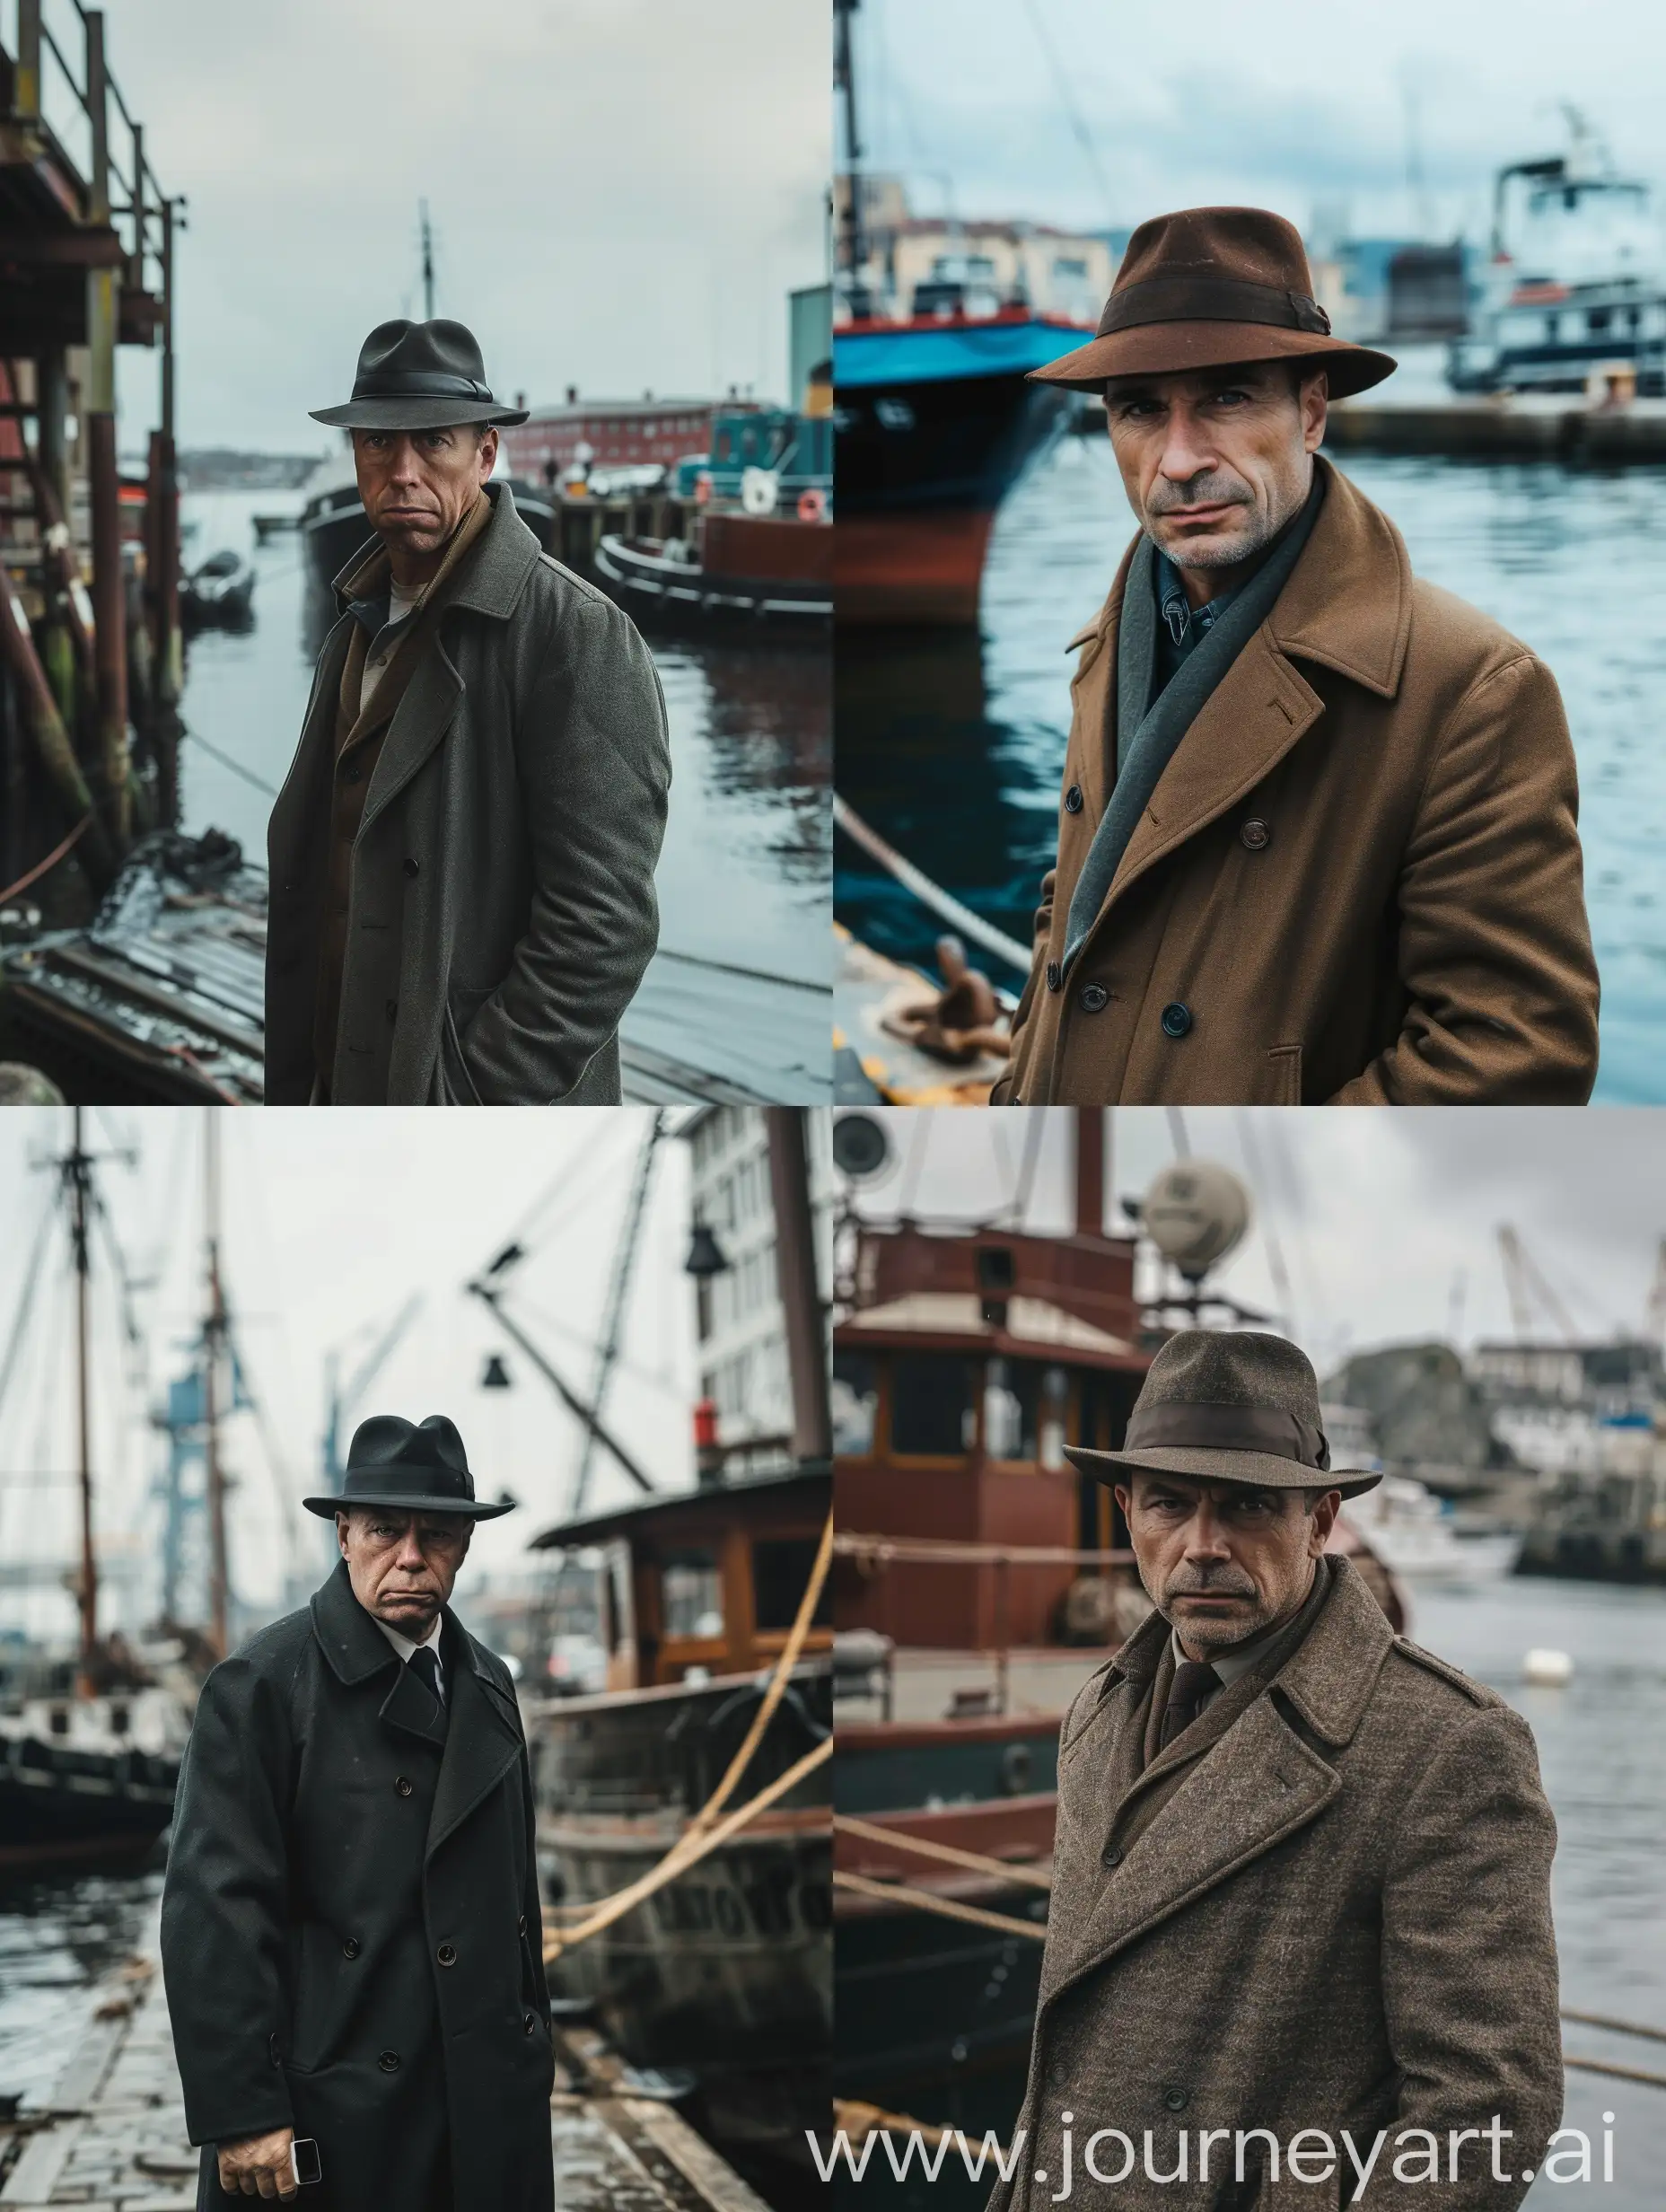 Detective-by-the-Dock-Investigator-at-the-Port-Looking-into-the-Camera-4K-Photo